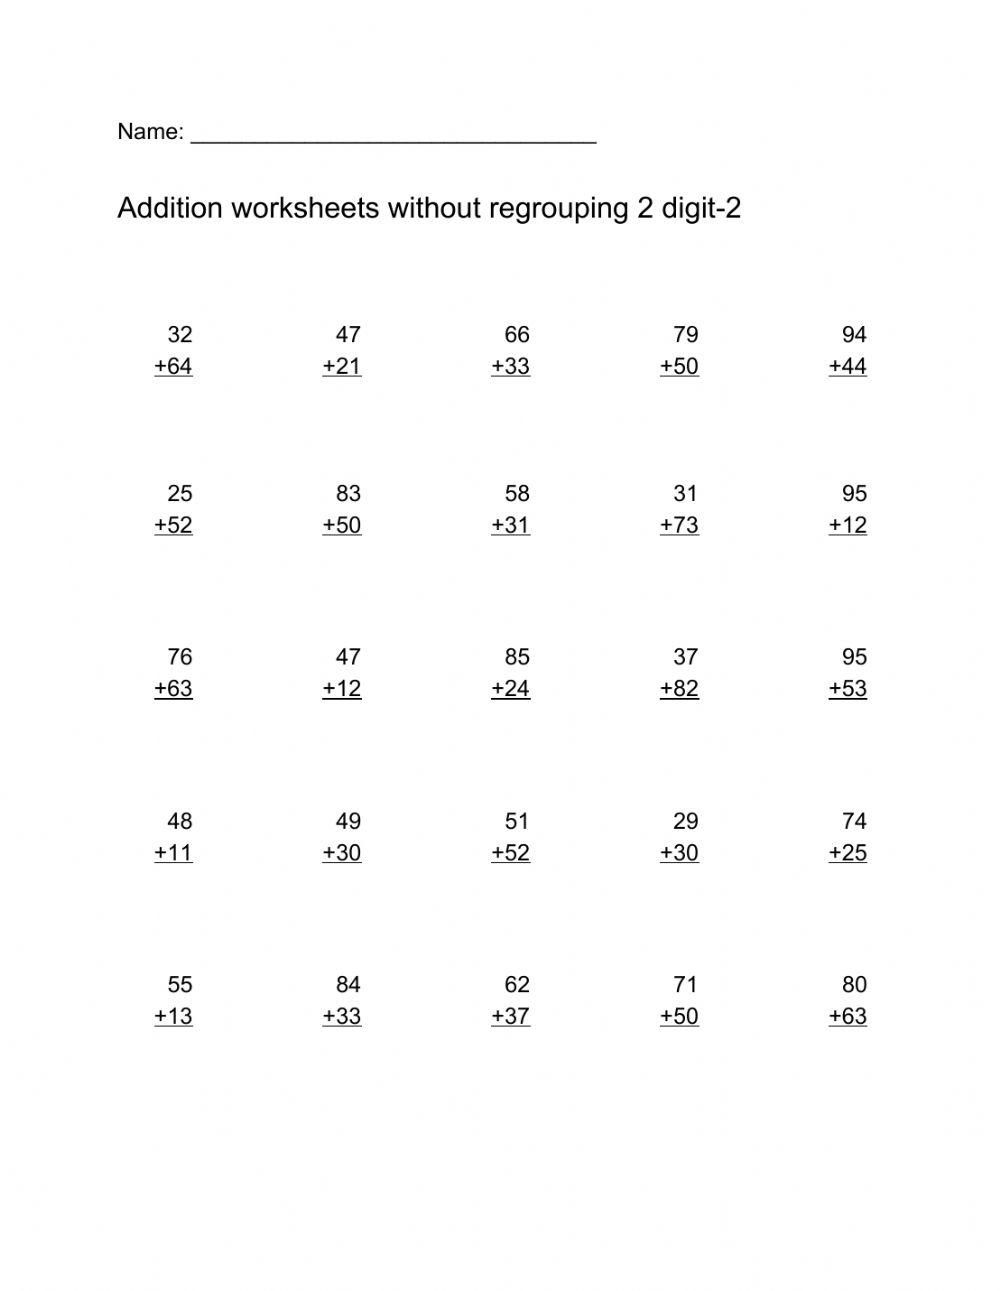 Addition worksheets without regrouping 2 digit-2